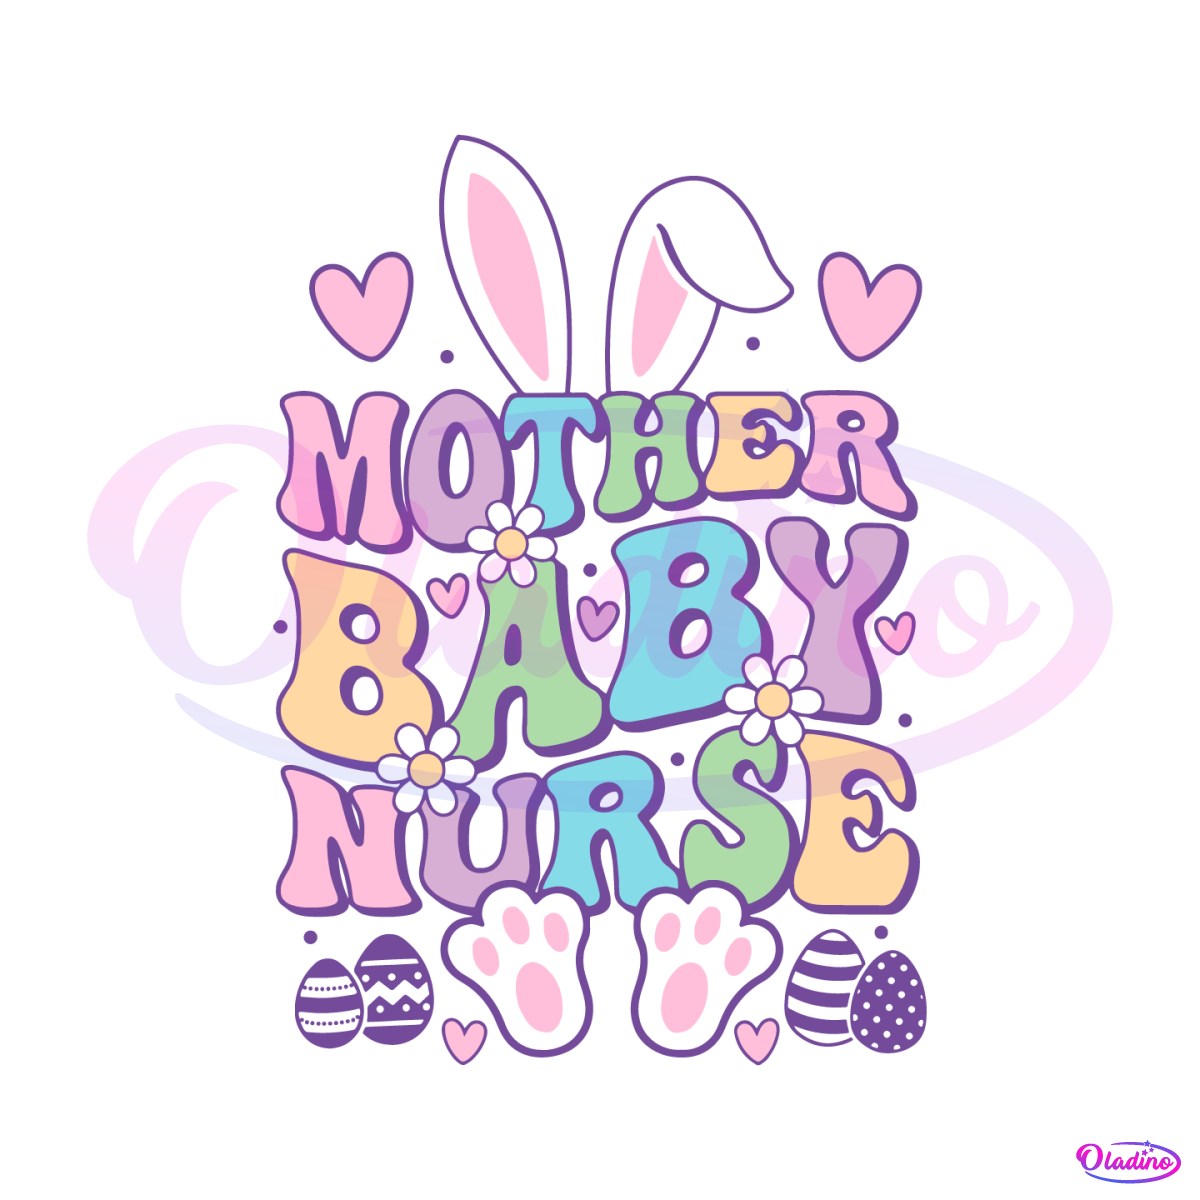 mother-baby-nurse-bunny-easter-svg